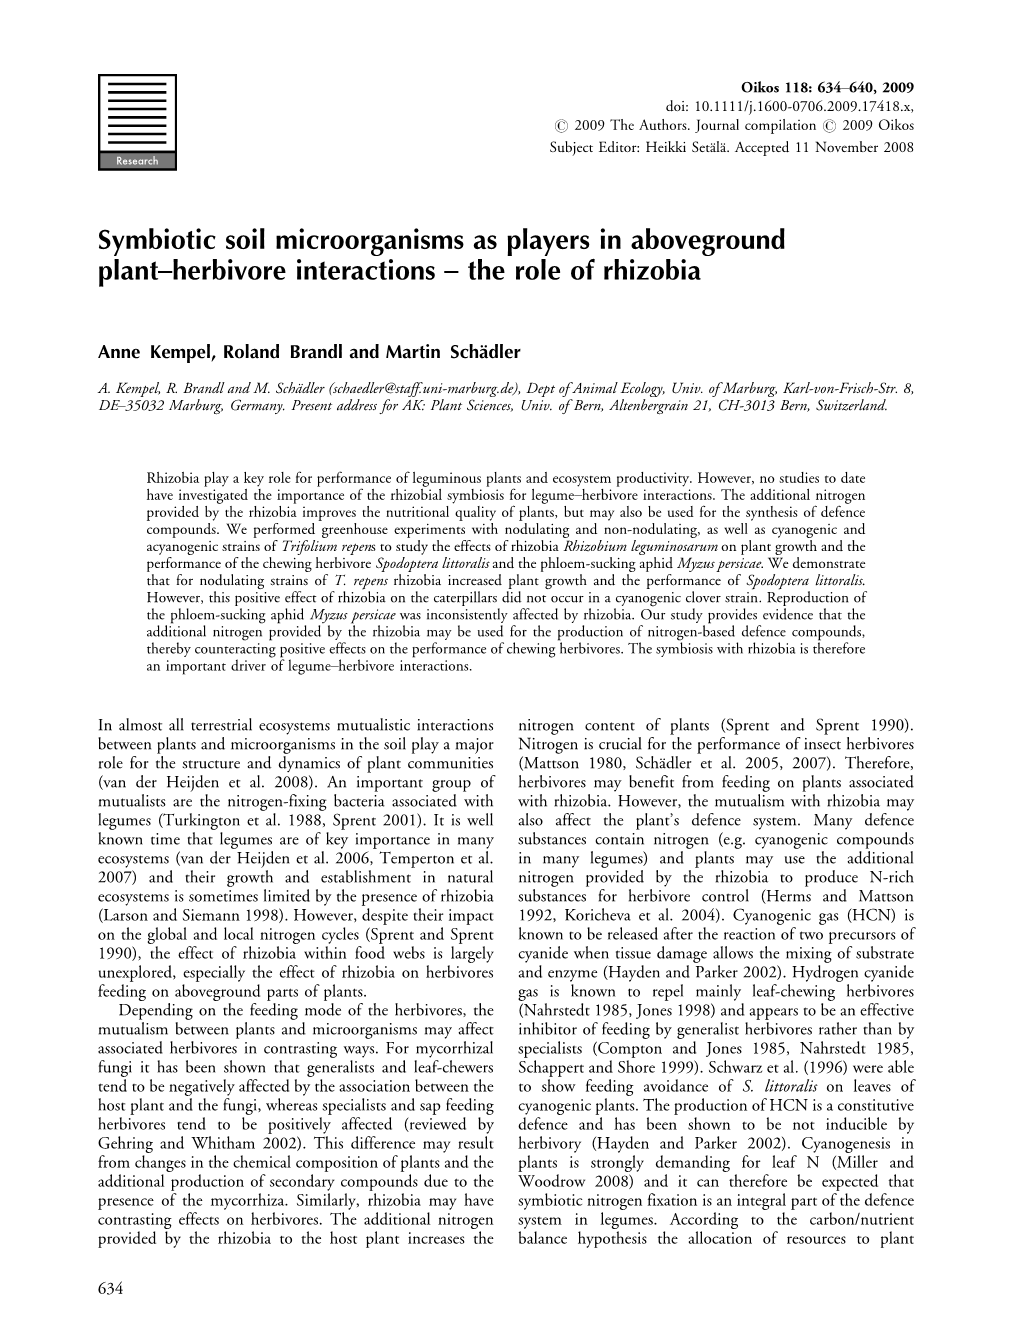 Symbiotic Soil Microorganisms As Players in Aboveground Plant�Herbivore Interactions � the Role of Rhizobia